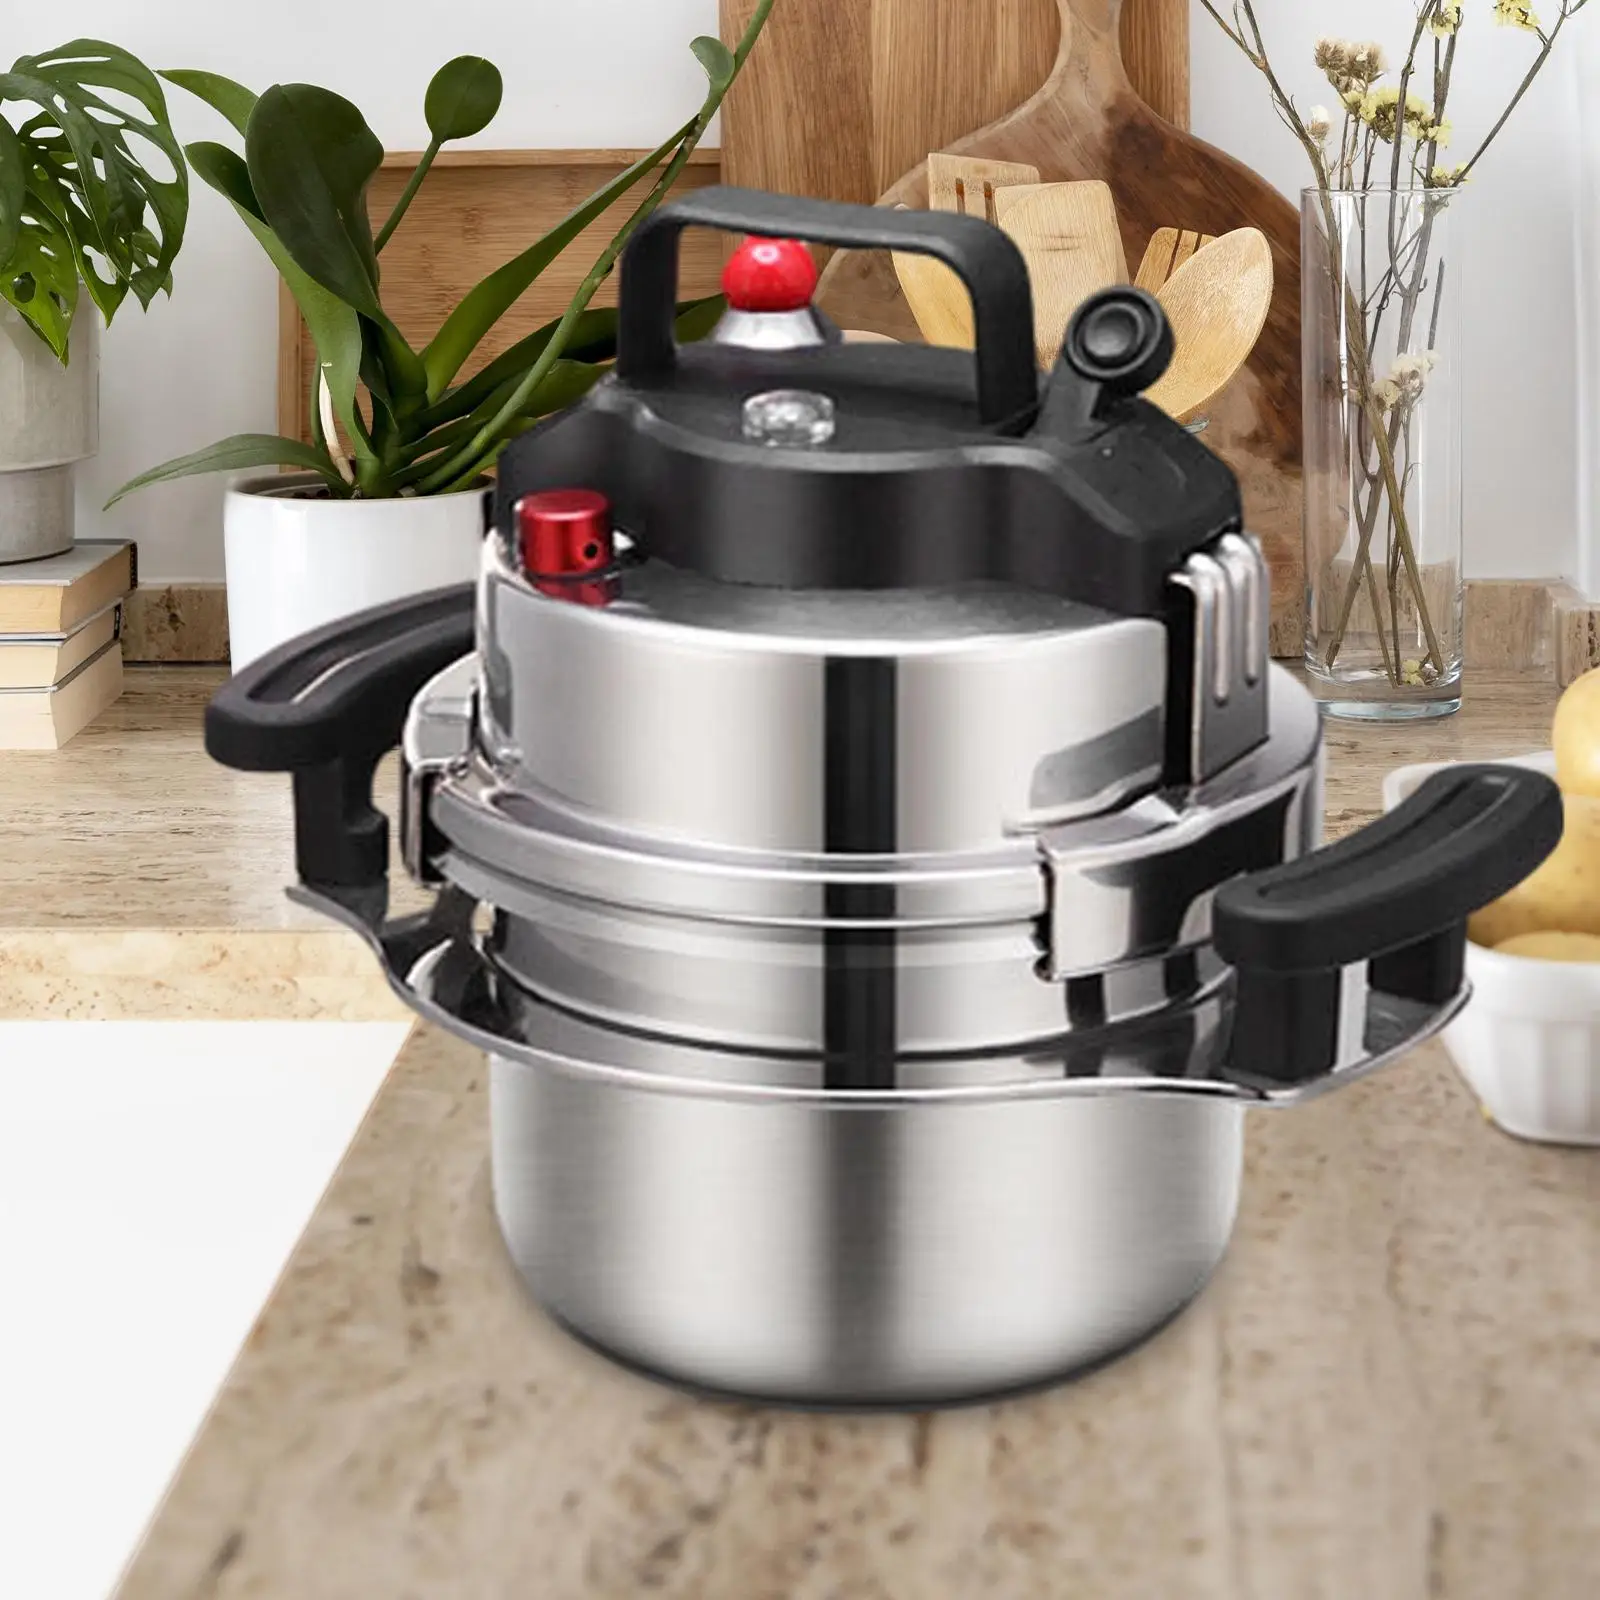 Pressure Cooker Canning Pot Nonstick with Secure Knobs Household Mini Pot Rice Cooker for Commercial BBQ Outdoor Camping Picnic